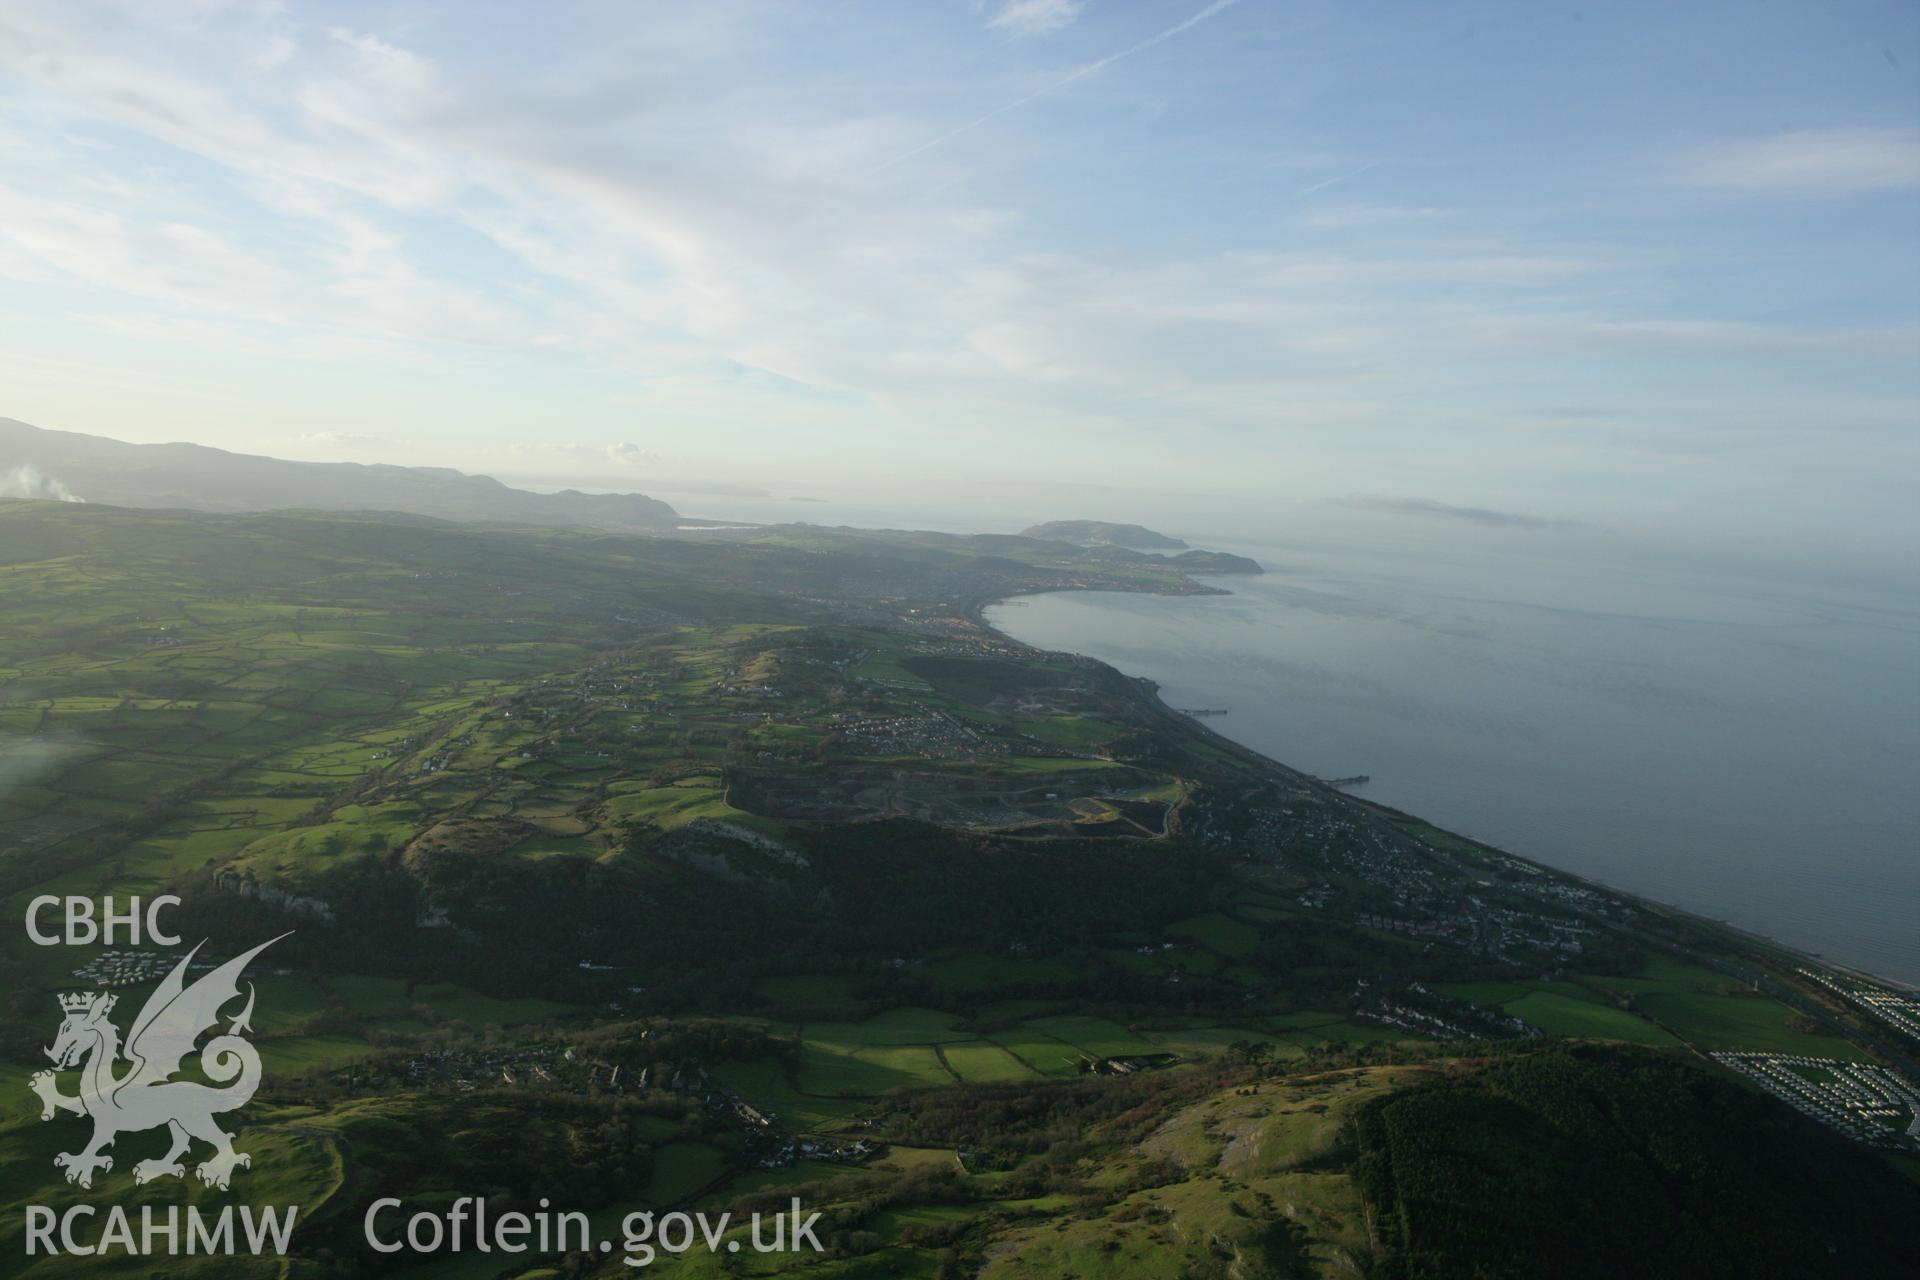 RCAHMW colour oblique aerial photograph of Colwyn Bay and surrounding landscape from the east. Taken on 10 December 2009 by Toby Driver